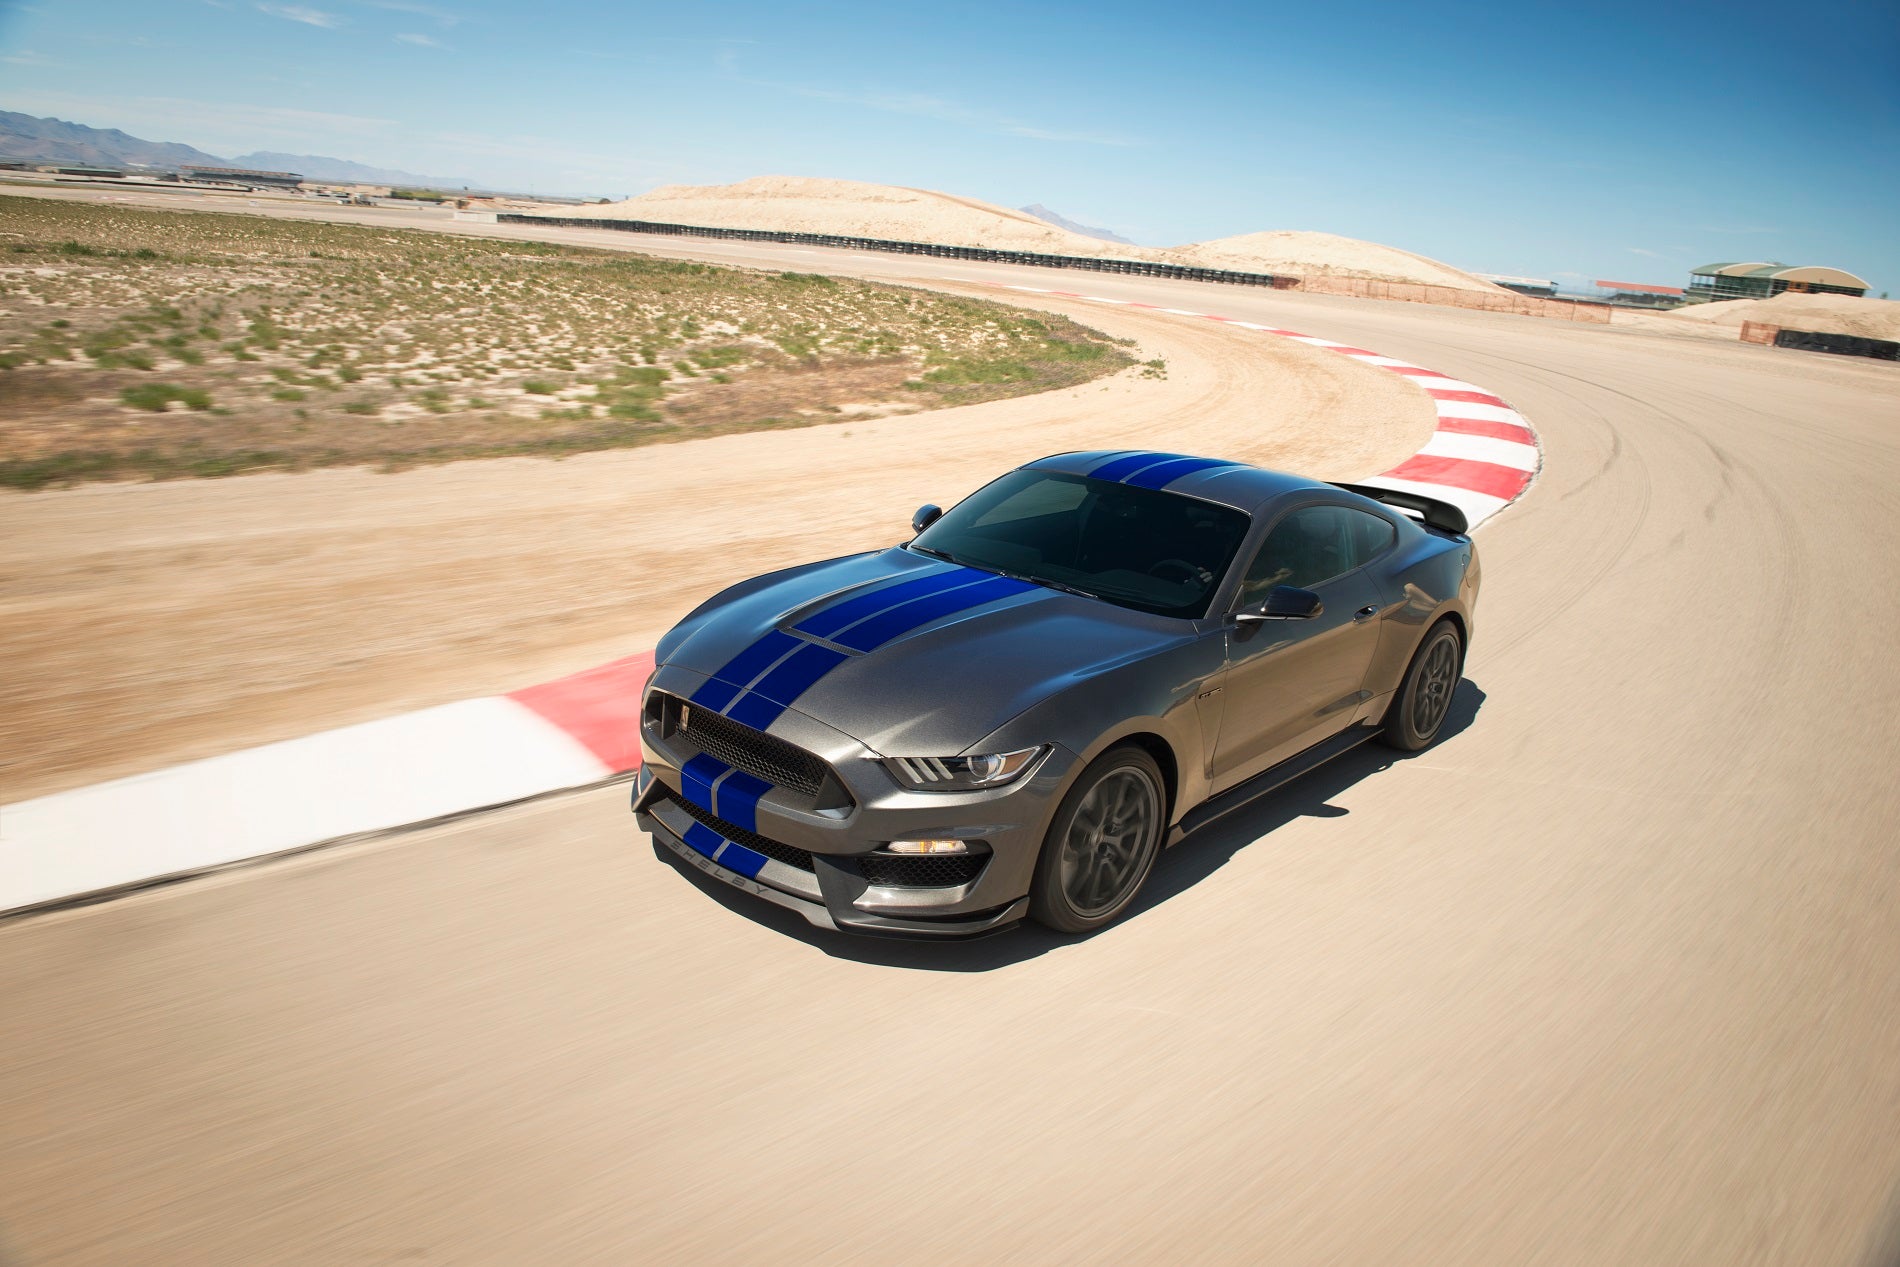 Ford Mustang Driving on Track